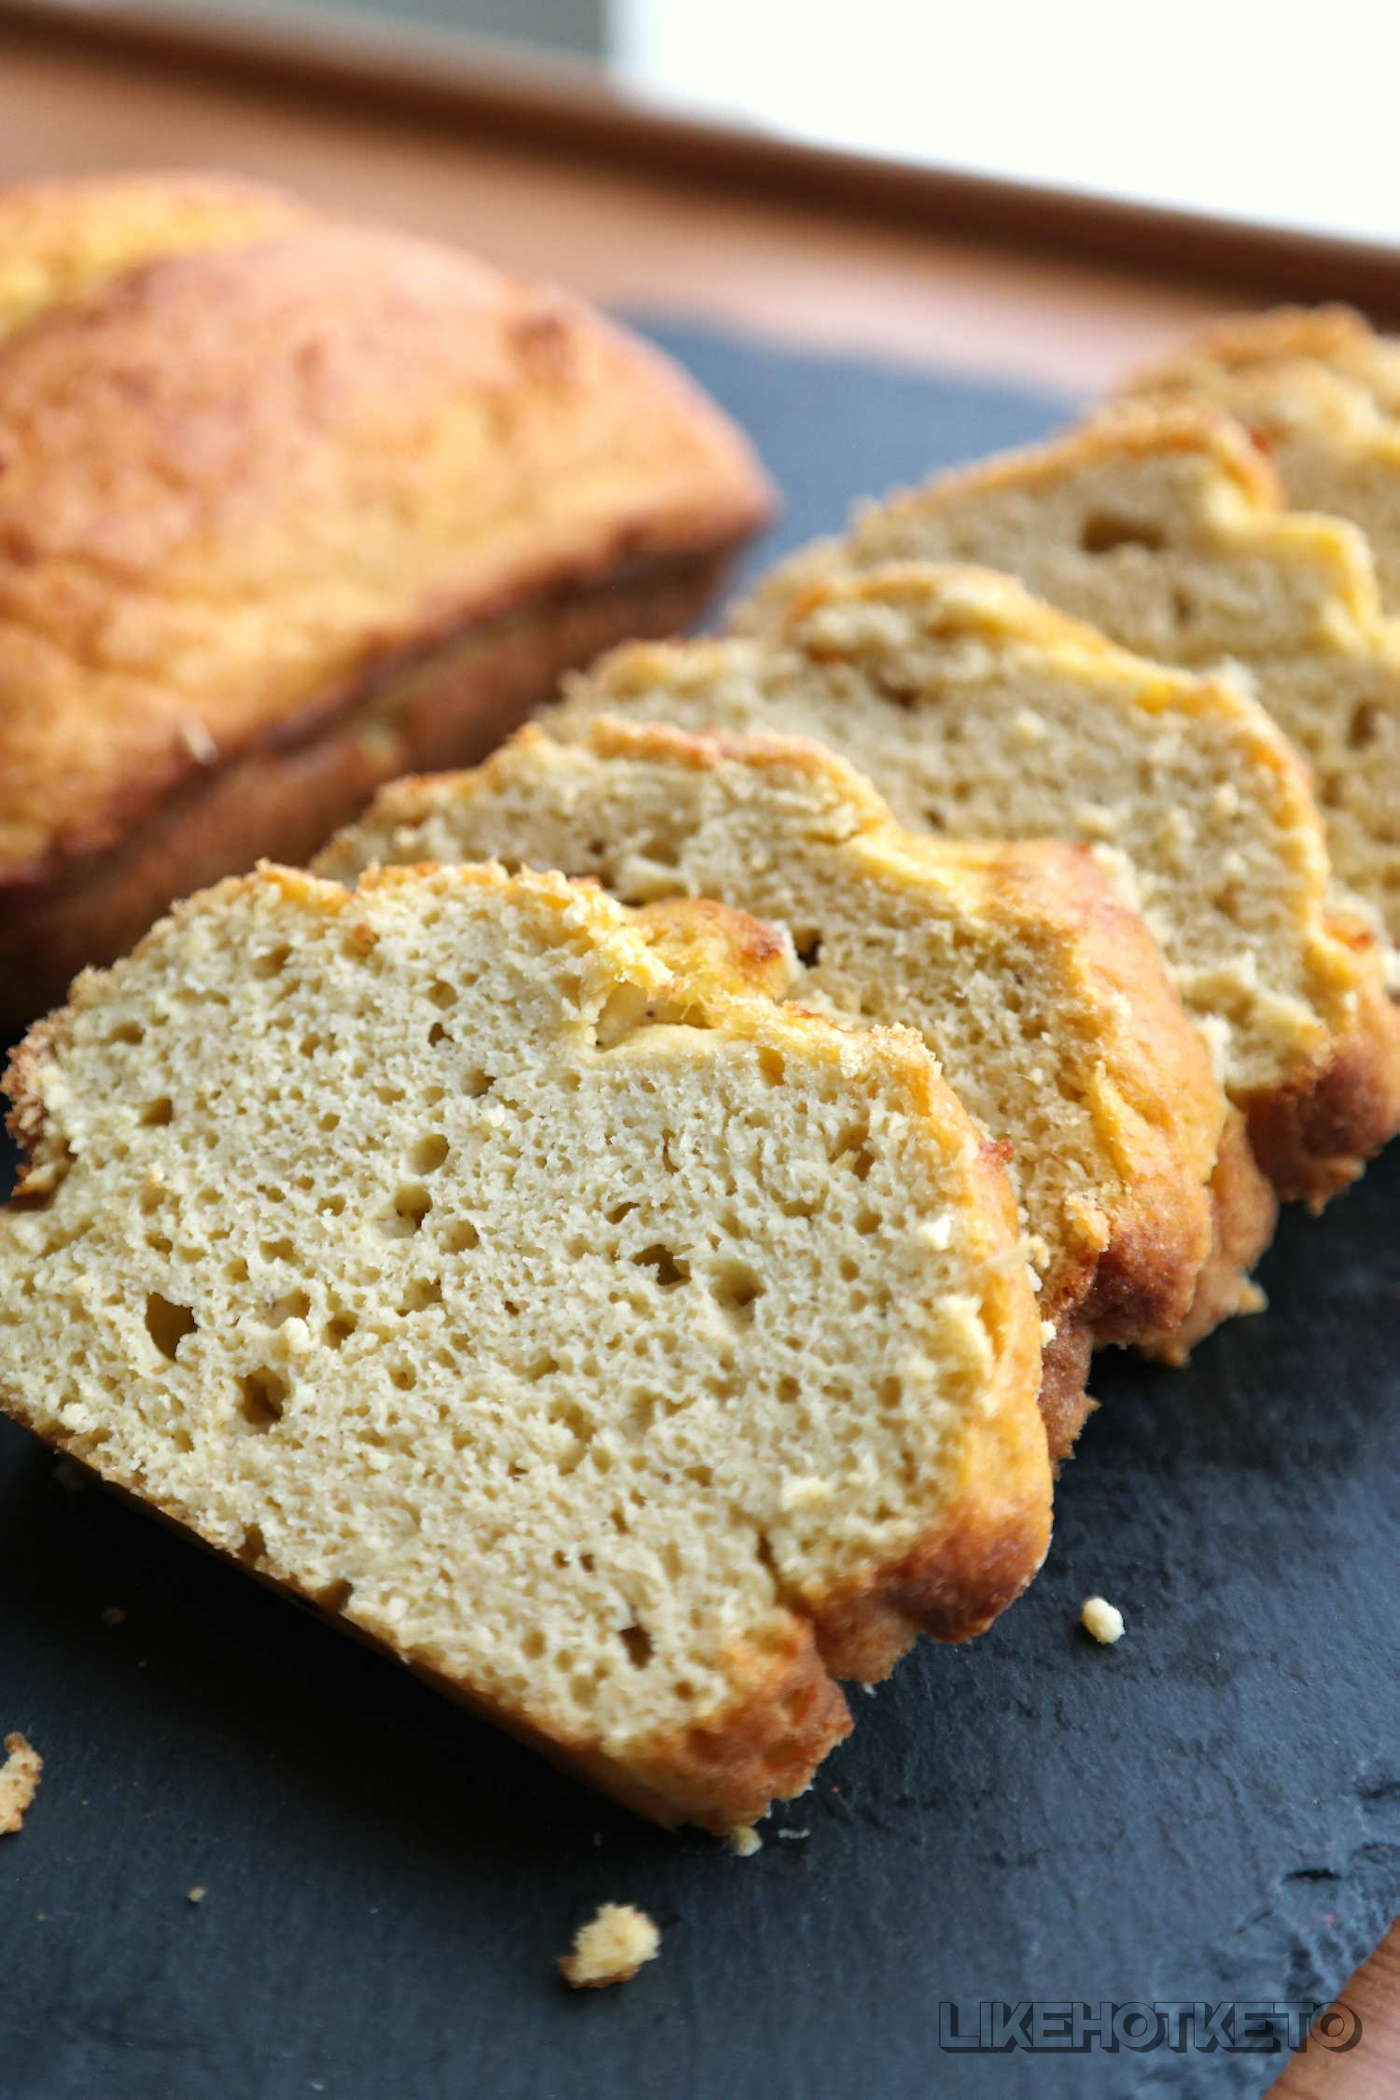 Slices of low-carb flourless gluten-free bread.